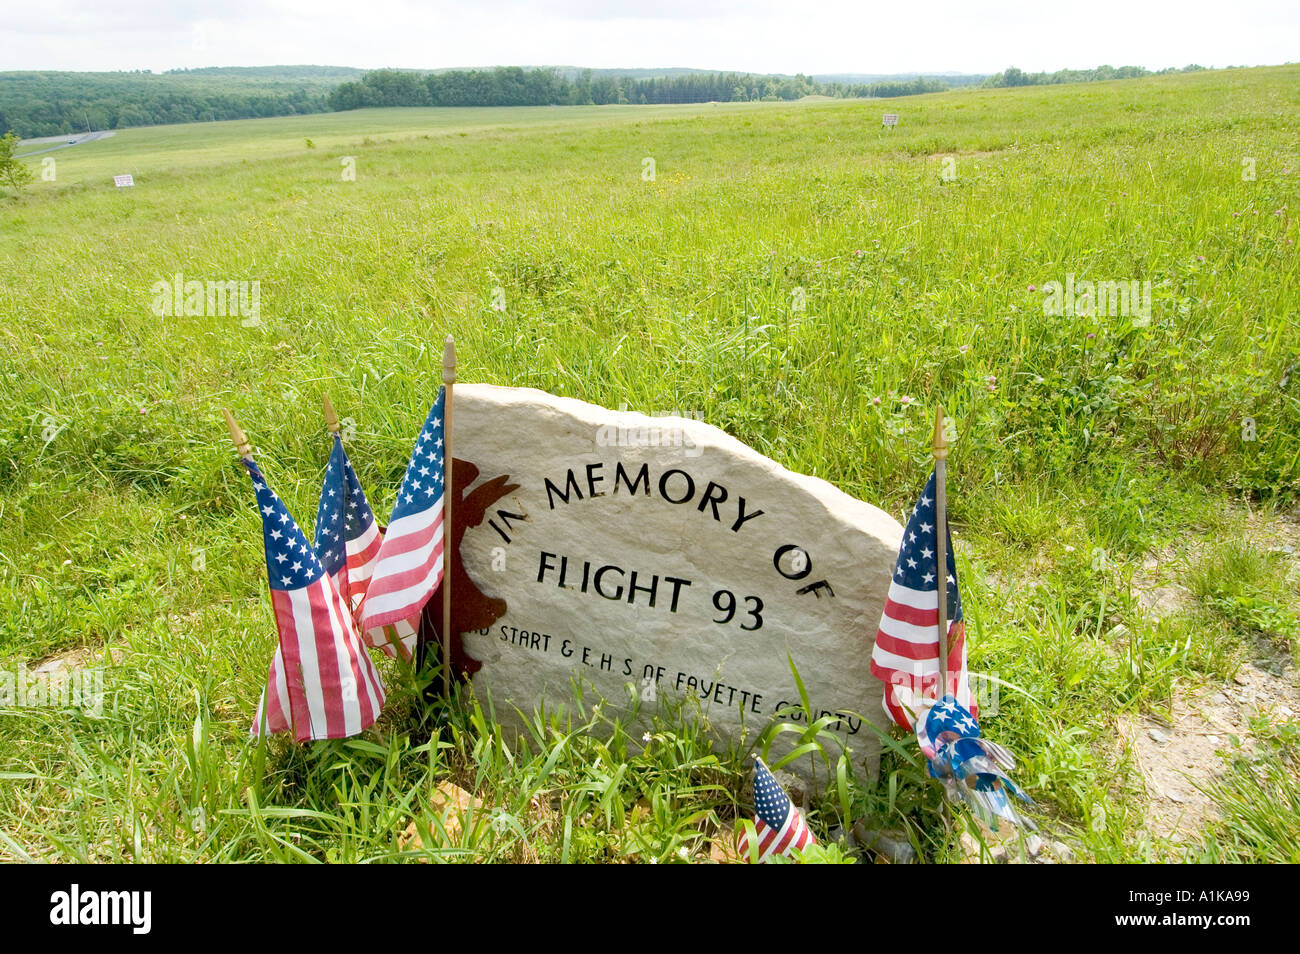 Crash site of flight 93 the air plane that was high jacked on 911 and went down in a field at Shanksville PA Stock Photo